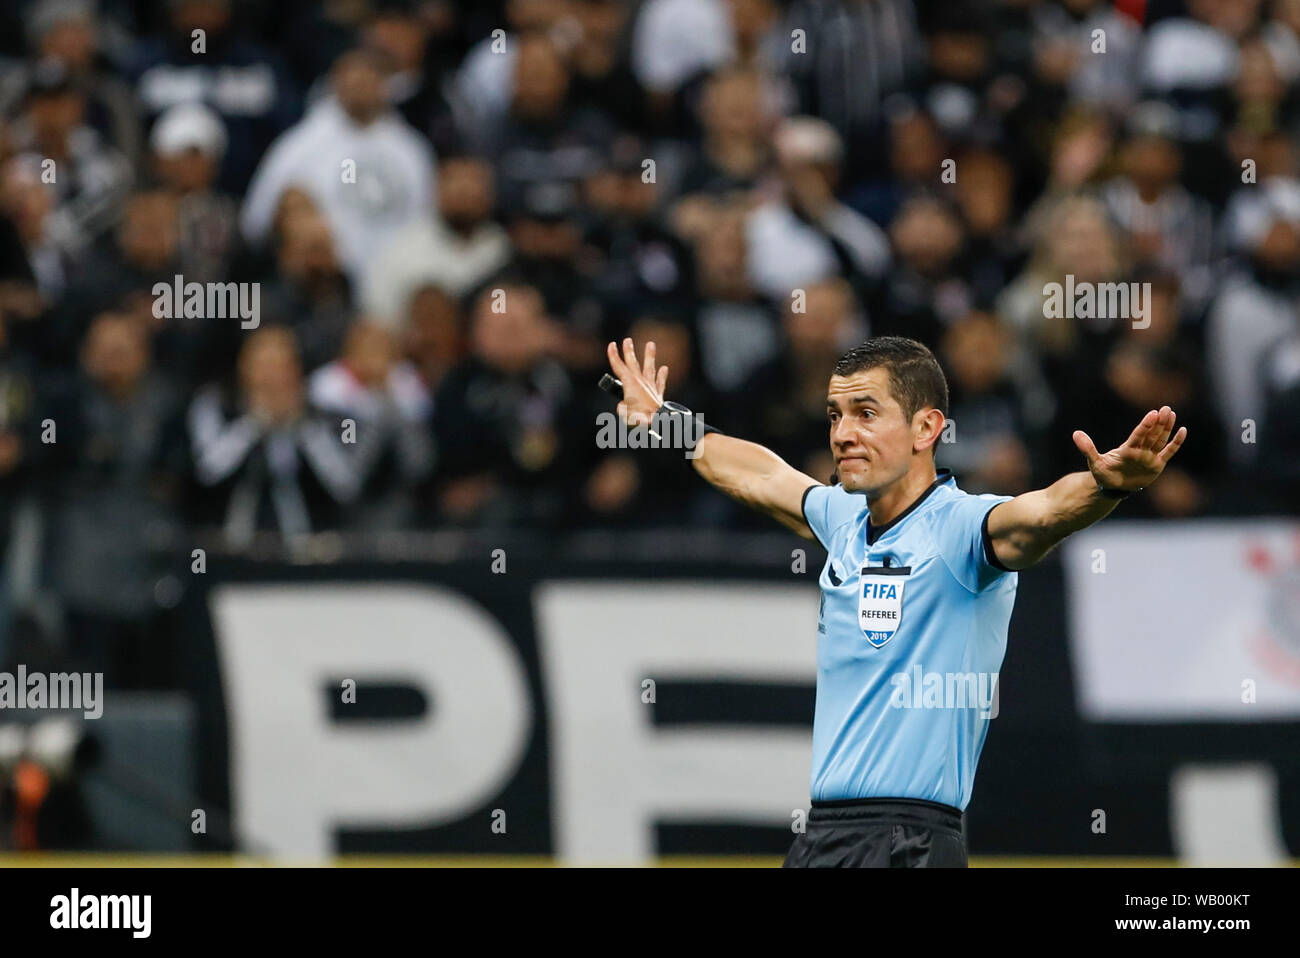 SÃO PAULO, SP - 22.08.2019: CORINTHIANS X FLUMINENSE - Referee Andres Rojas (COL) during a match between Corinthians x Fluminense held at Corinthians Arena, East Zone of São Paulo, SP. The match is the first valid for the quarterfinals of the 2019 South American Cup. (Photo: Ricardo Moreira/Fotoarena) Stock Photo